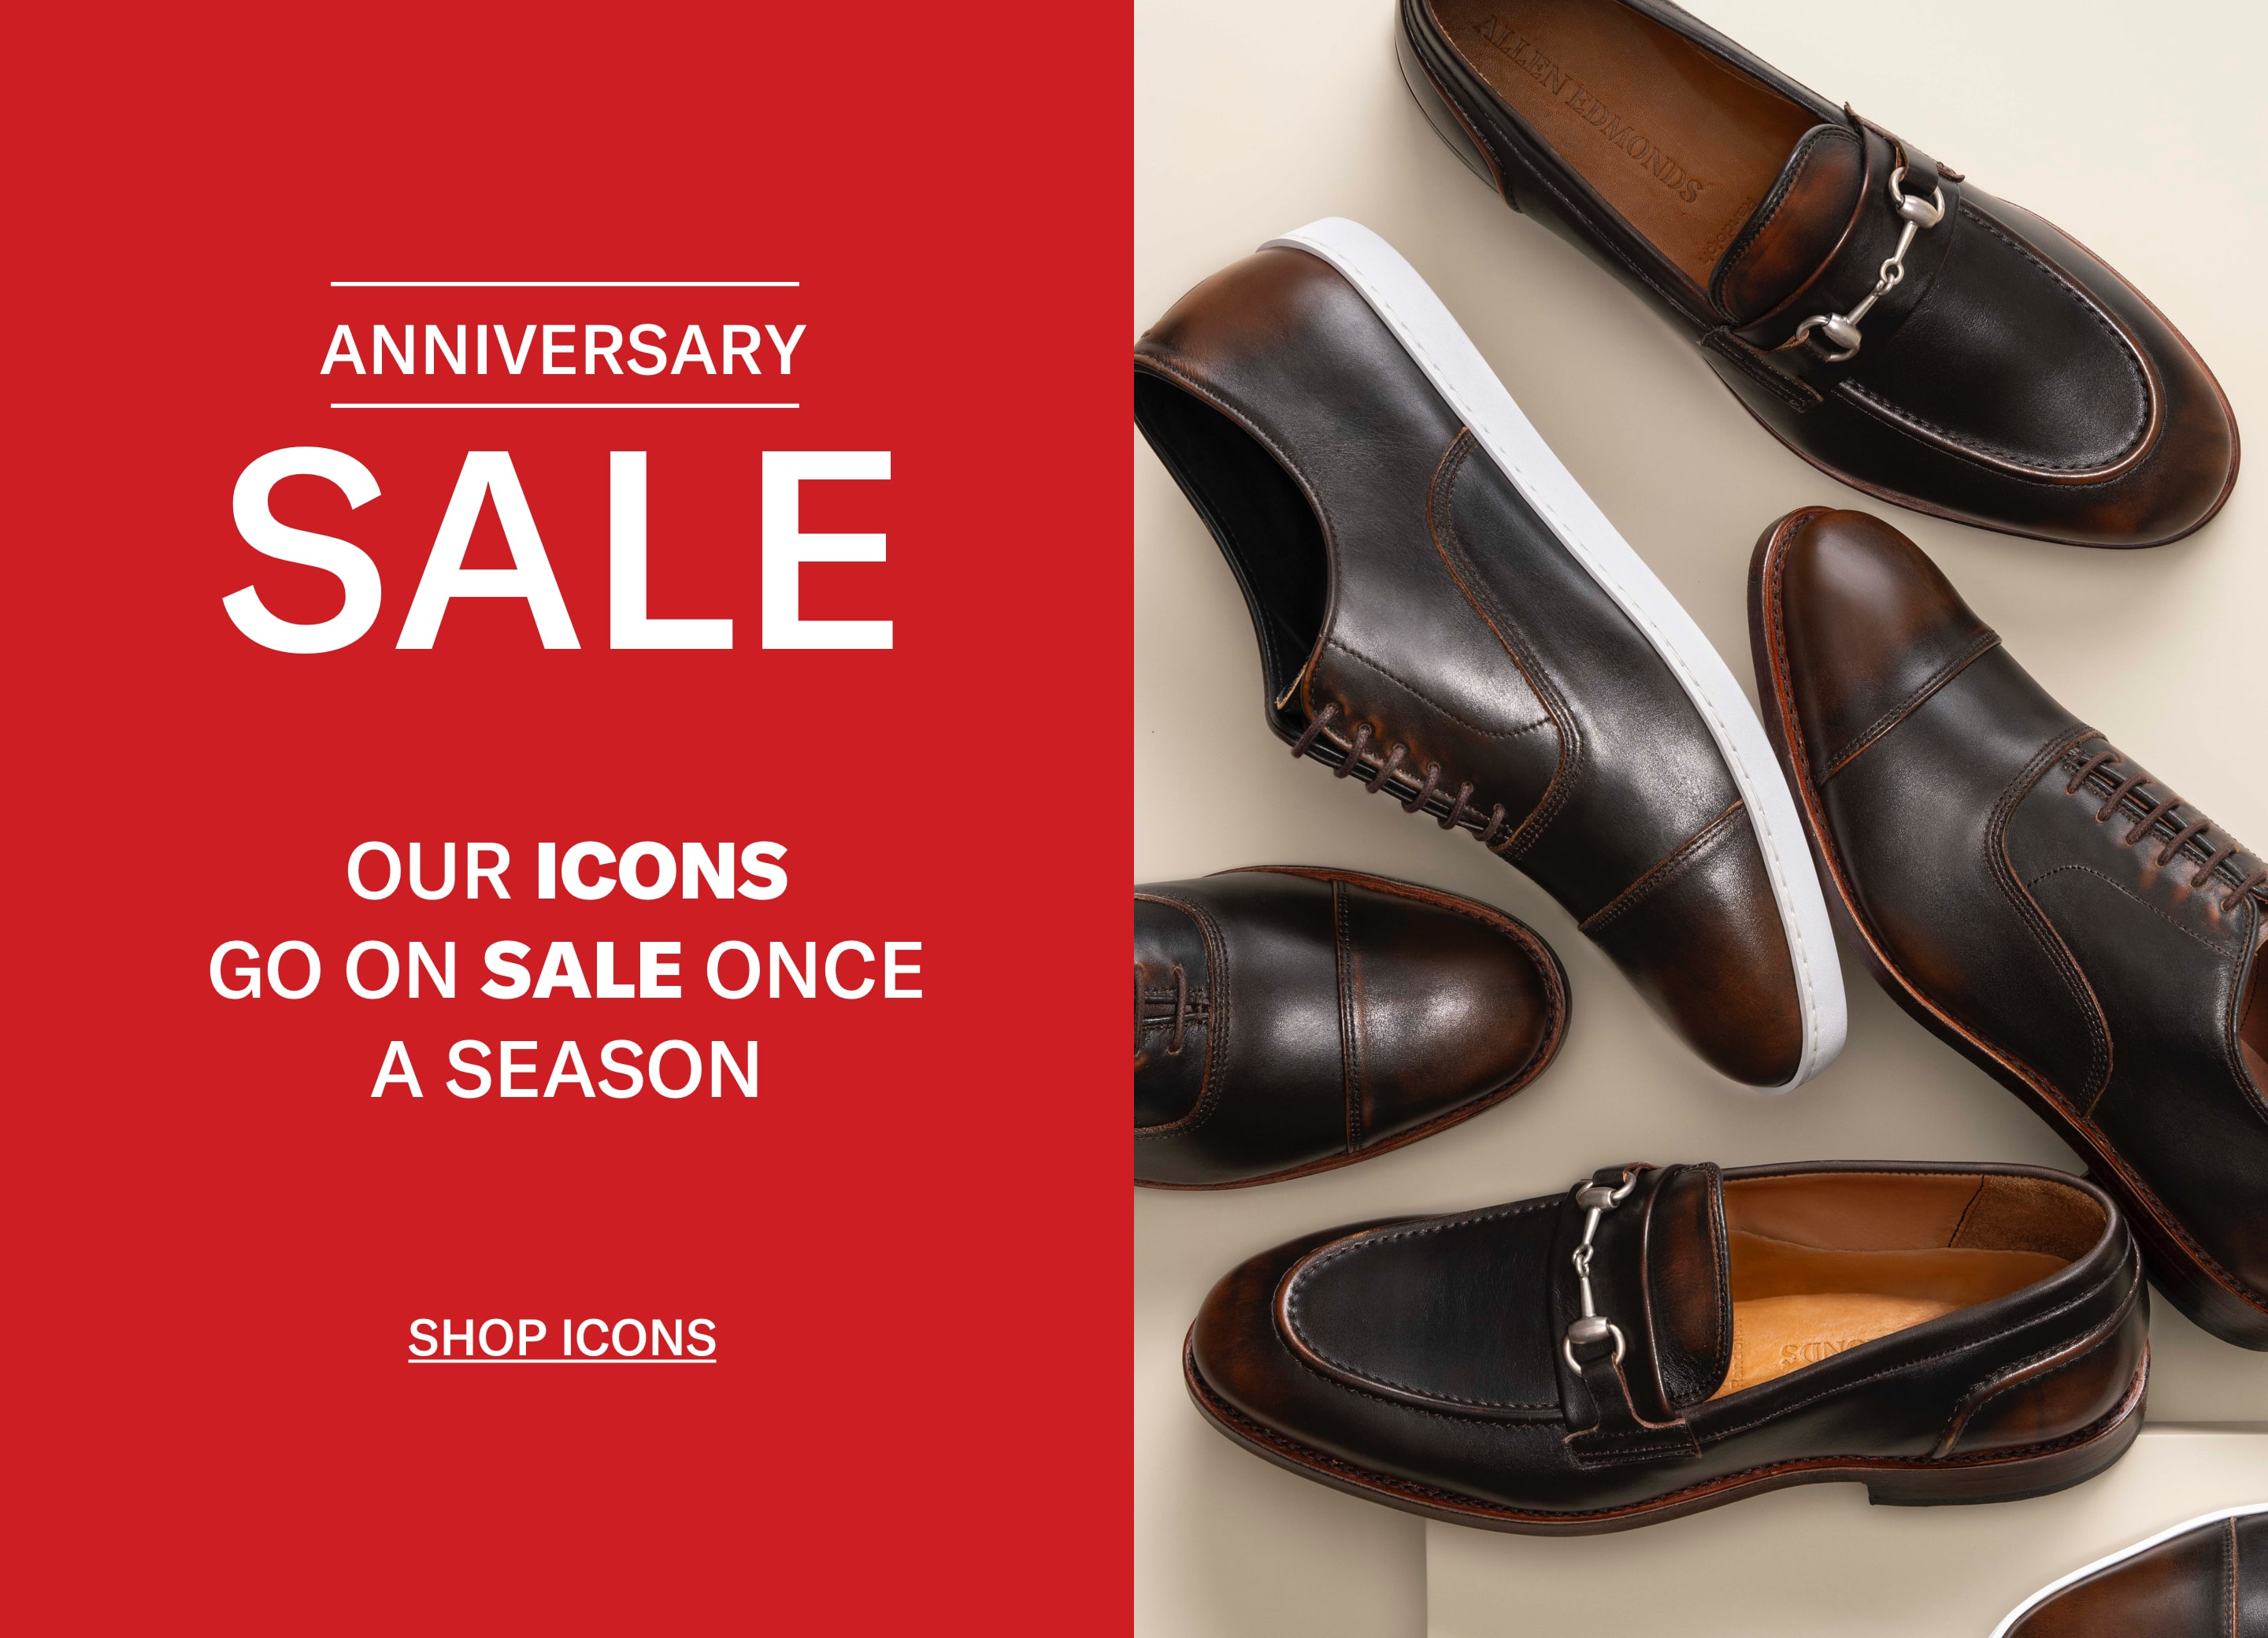 Our Biggest Sale of the Season | Save up to 40% | Anniversary Sale